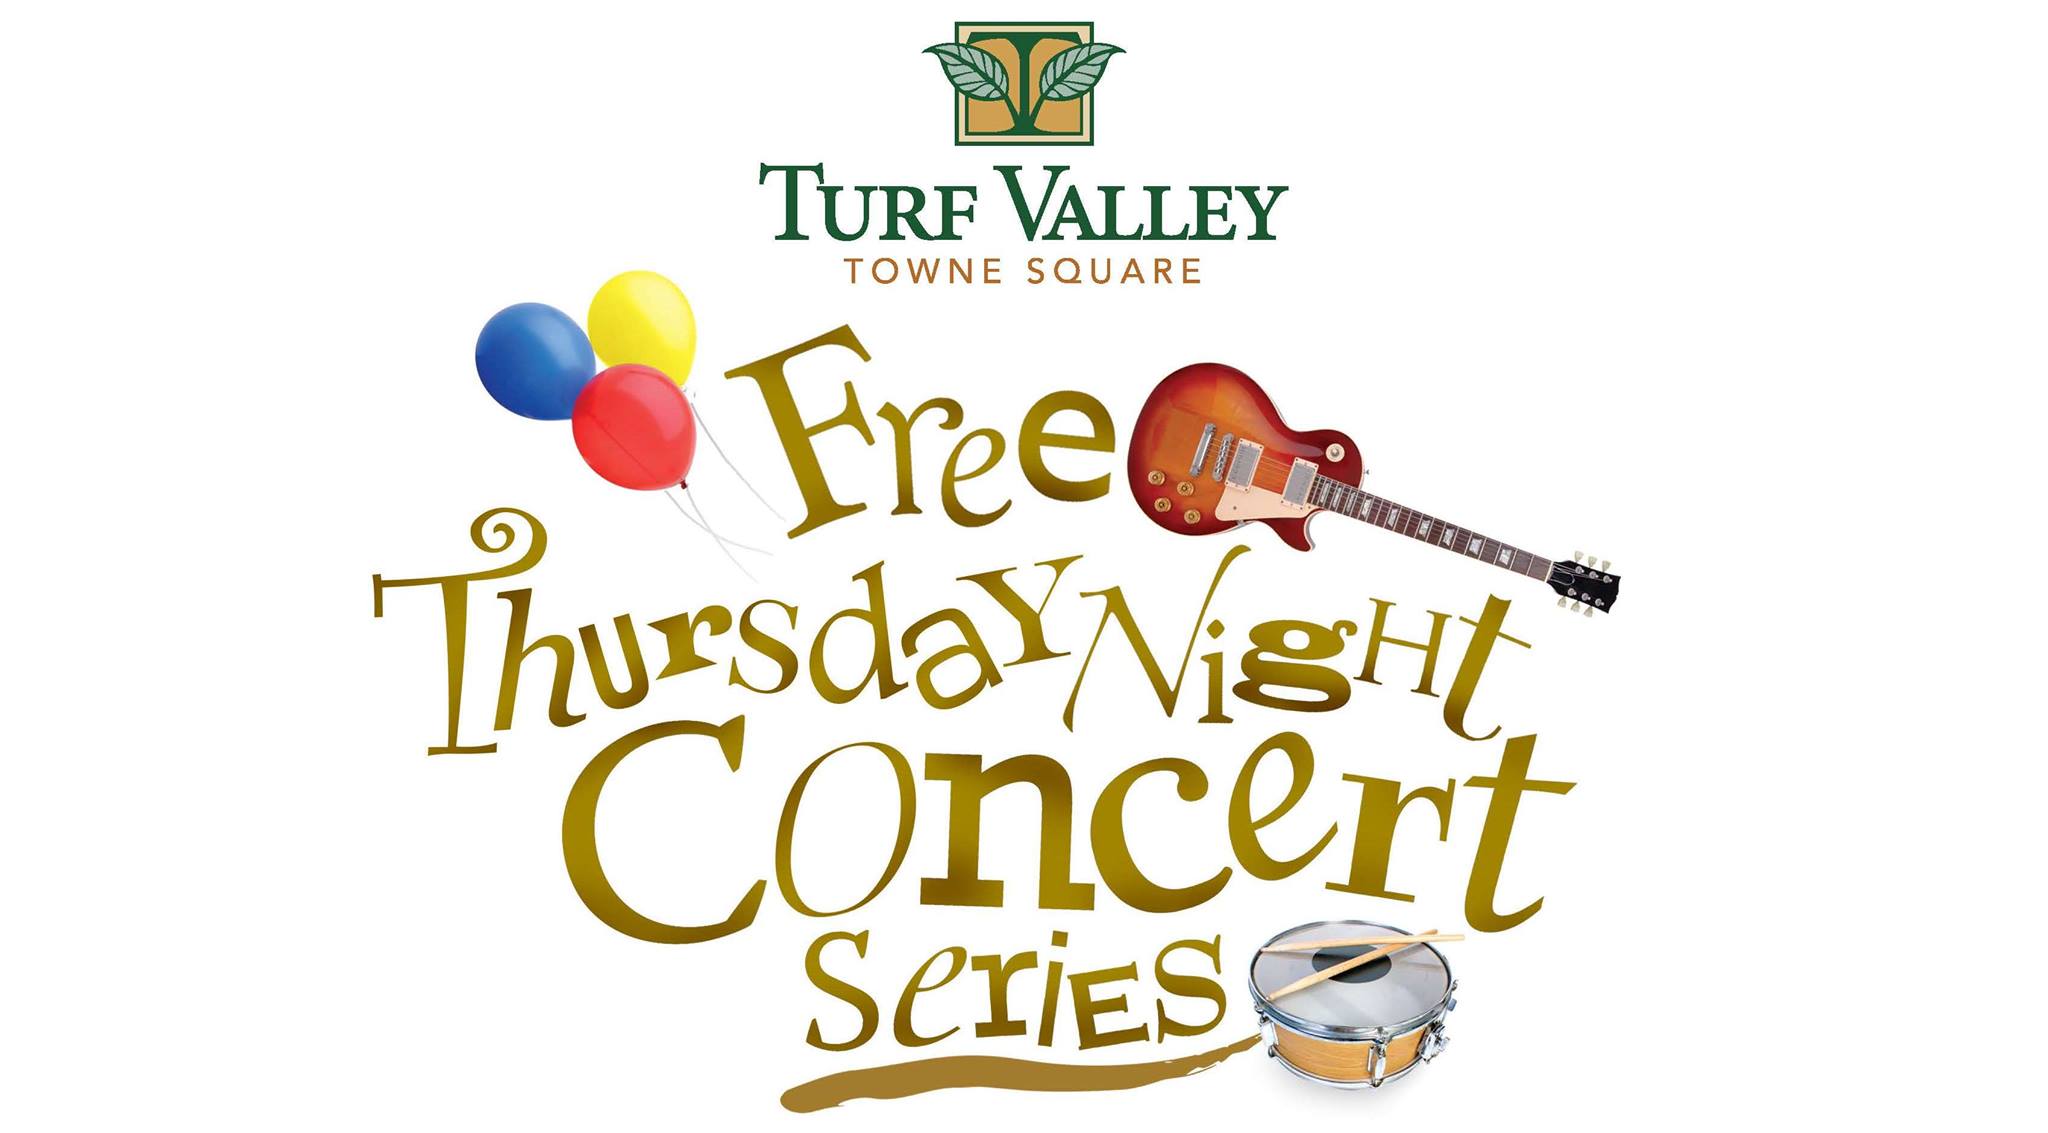 Paint Night at Turf Valley Thursday Night Concert Series